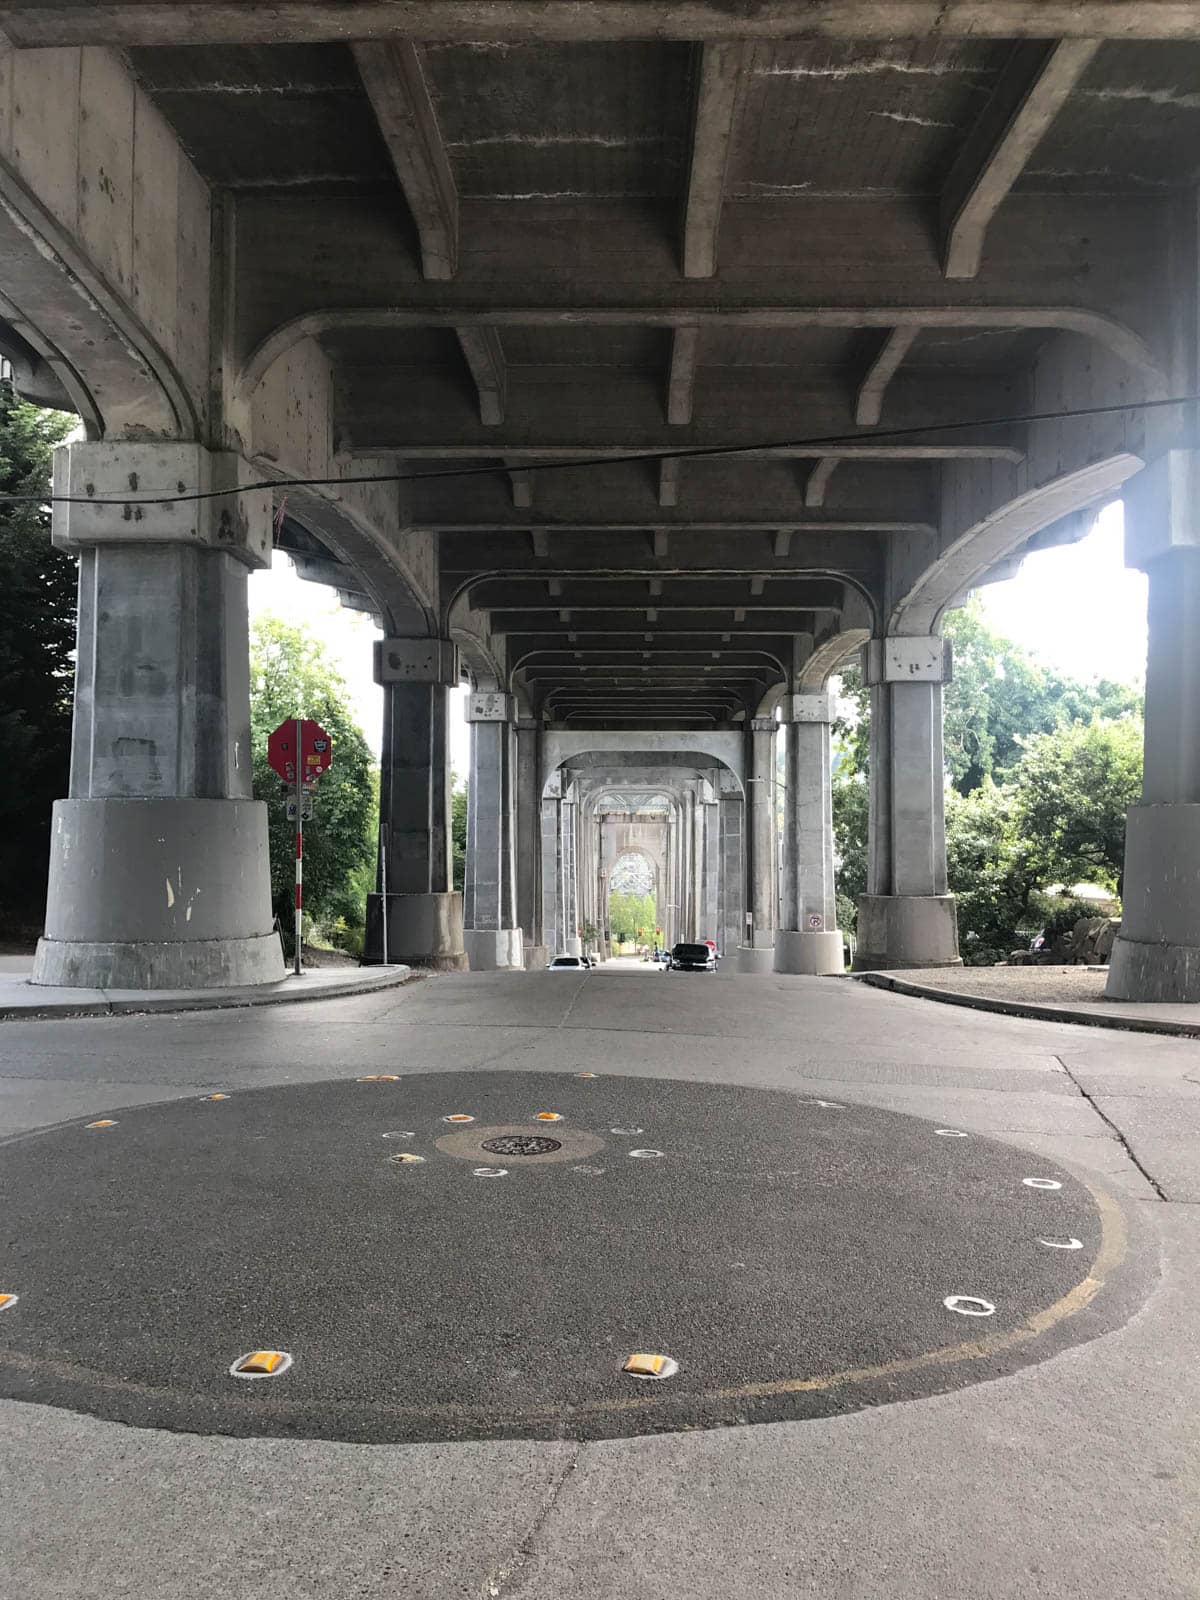 A view of the street under a bridge, across the length of the bridge. The bridge’s pillars are in view, and some cars can be seen in the distance parked by the sides of the street.